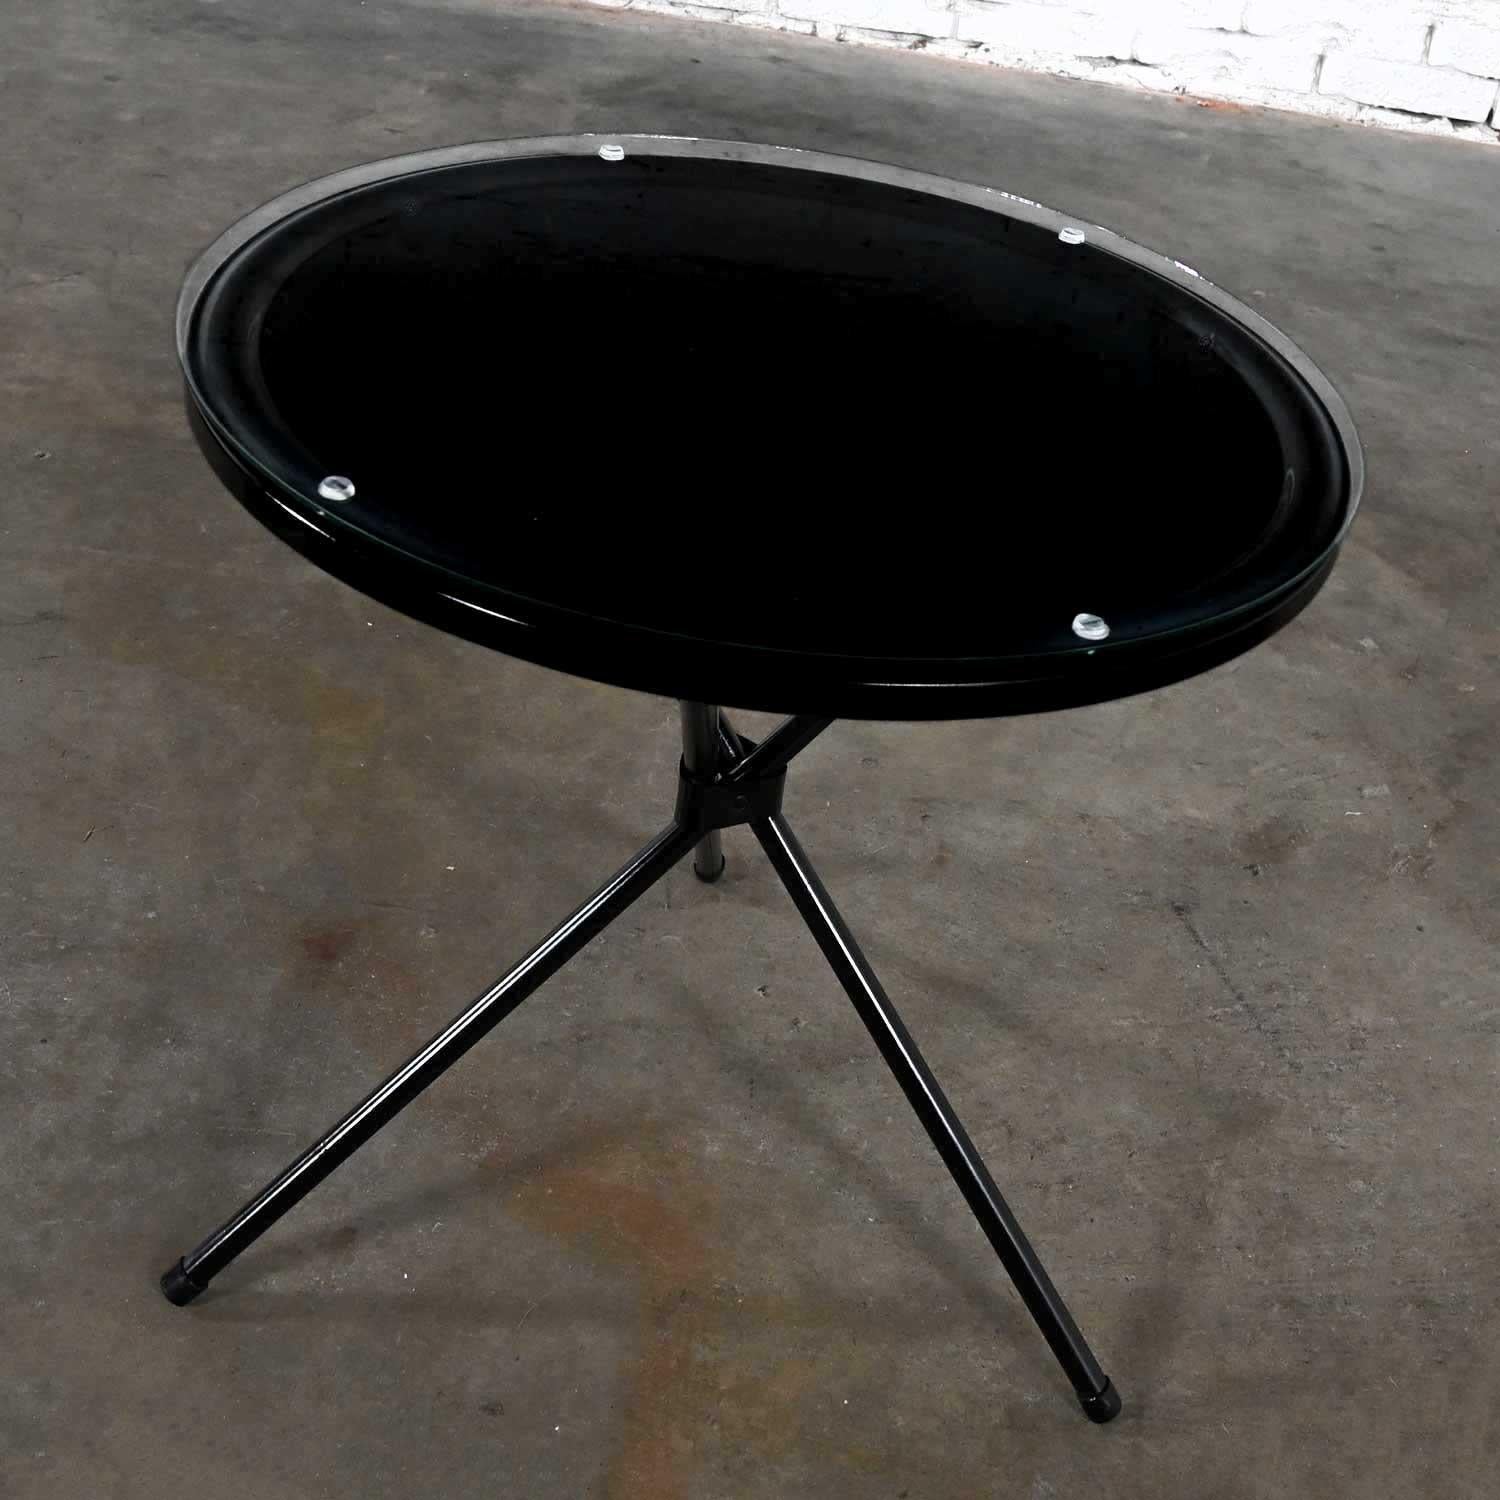 Spectacular vintage MCM (Mid-Century Modern) round black painted metal indoor/outdoor accent table with tripod base and glass top. Beautiful condition, keeping in mind that this is vintage and not new so will have signs of use and wear. We have